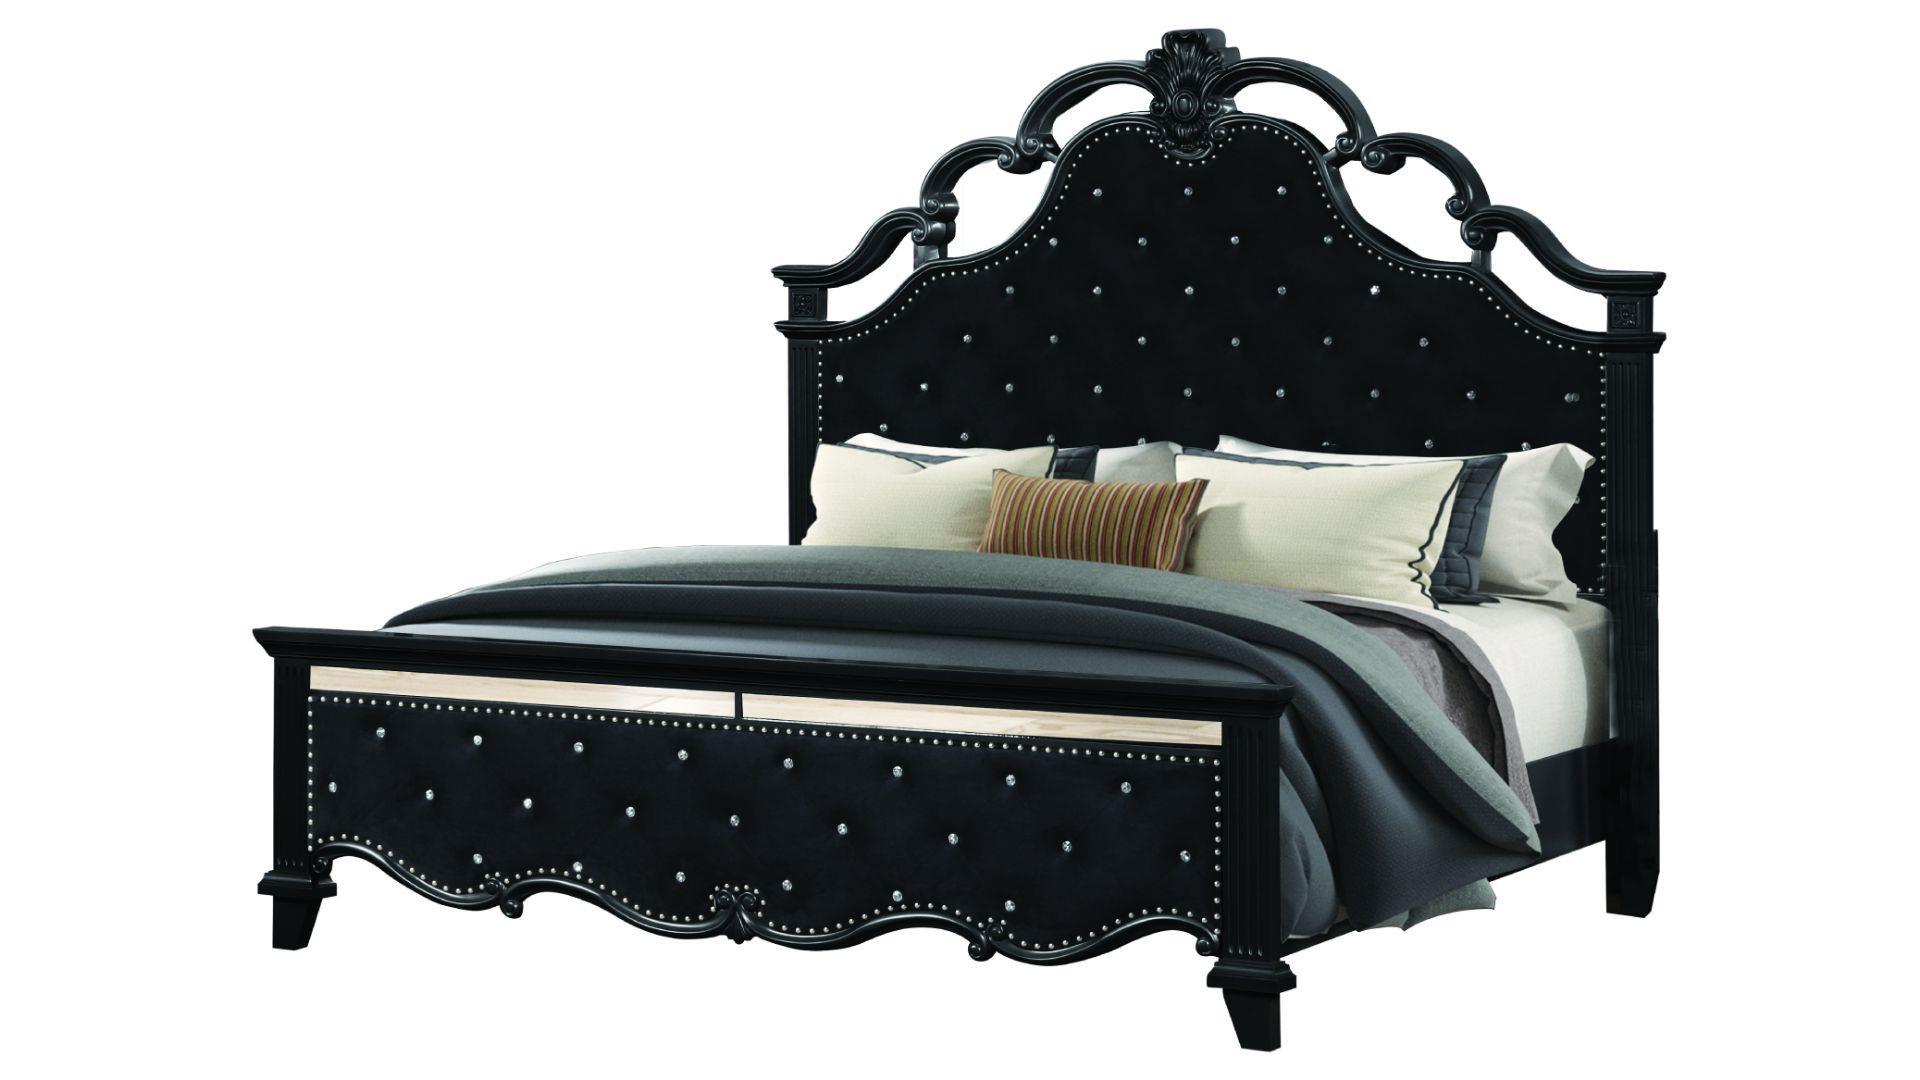 

    
Glam Black Tufted King Bedroom Set 5P MILAN Galaxy Home Contemporary Modern
